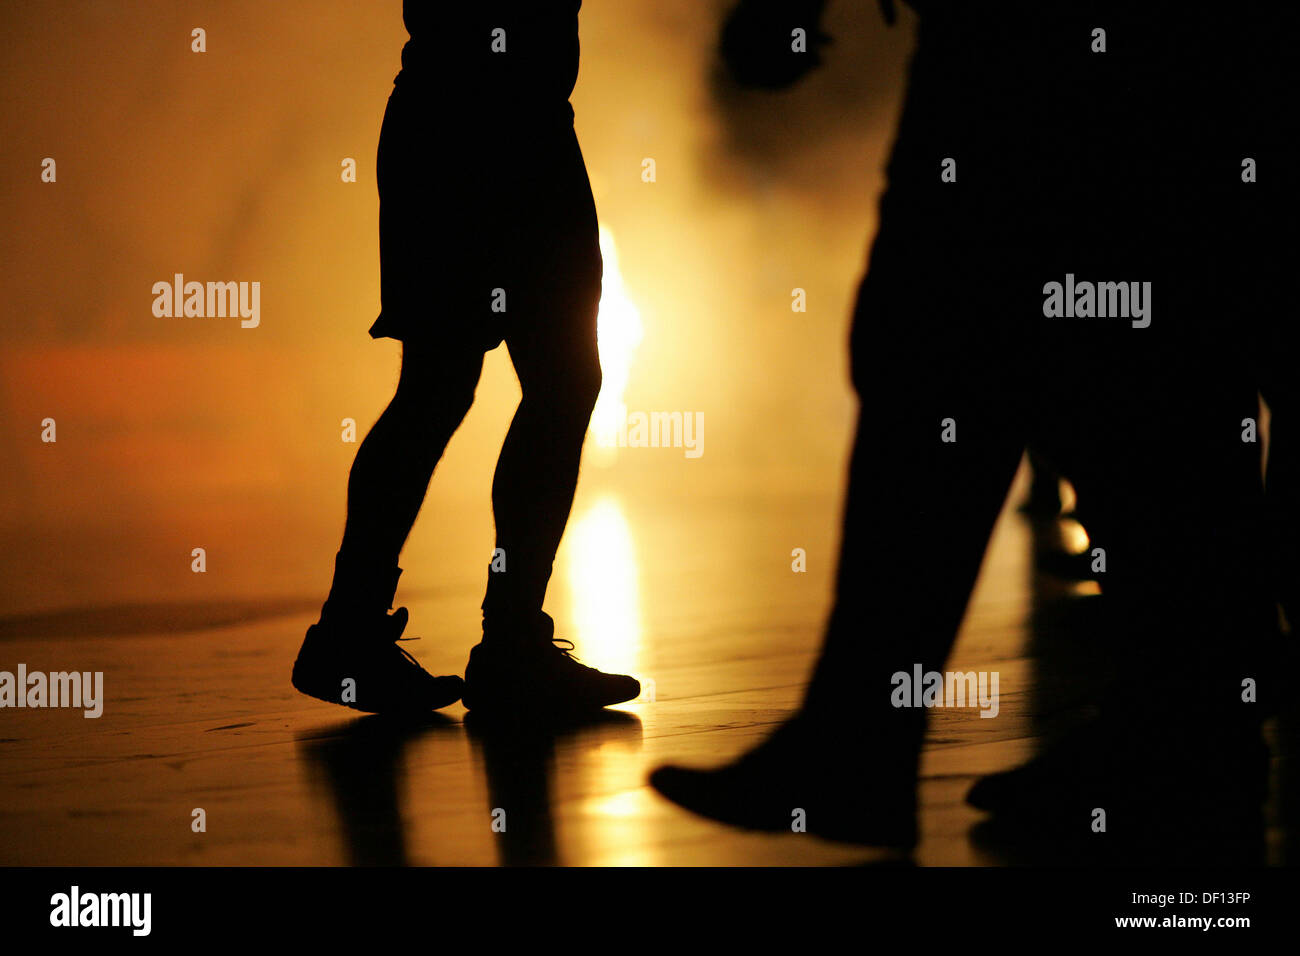 Berlin, Germany, silhouettes of legs Stock Photo